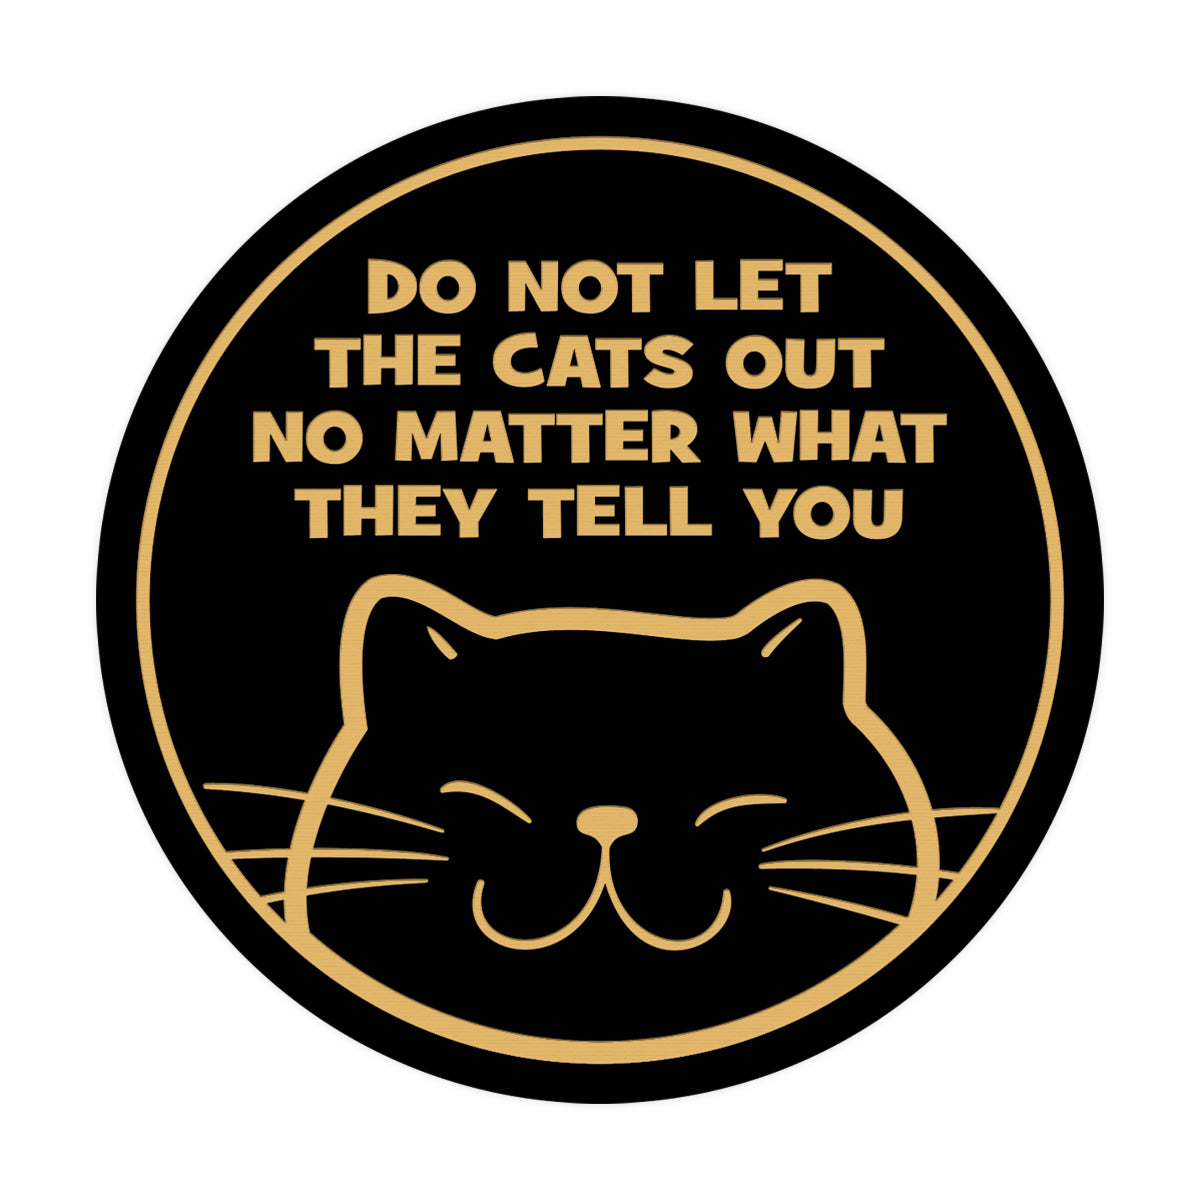 Motto Lita Circle Do Not Let the Cats Out No Matter What They Tell You Wall or Door Sign